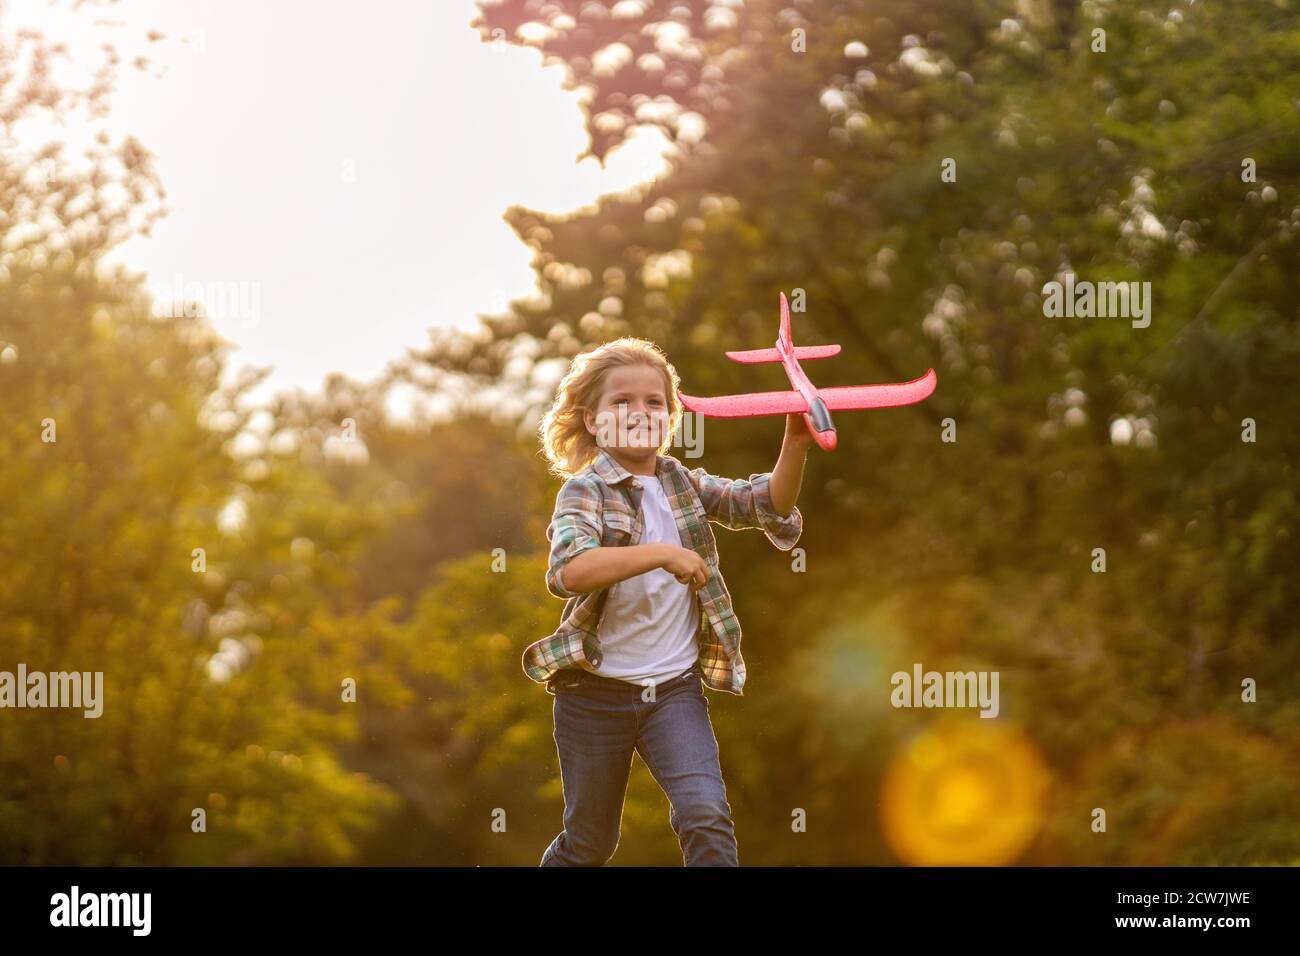 Little boy playing with toy plane in park Stock Photo